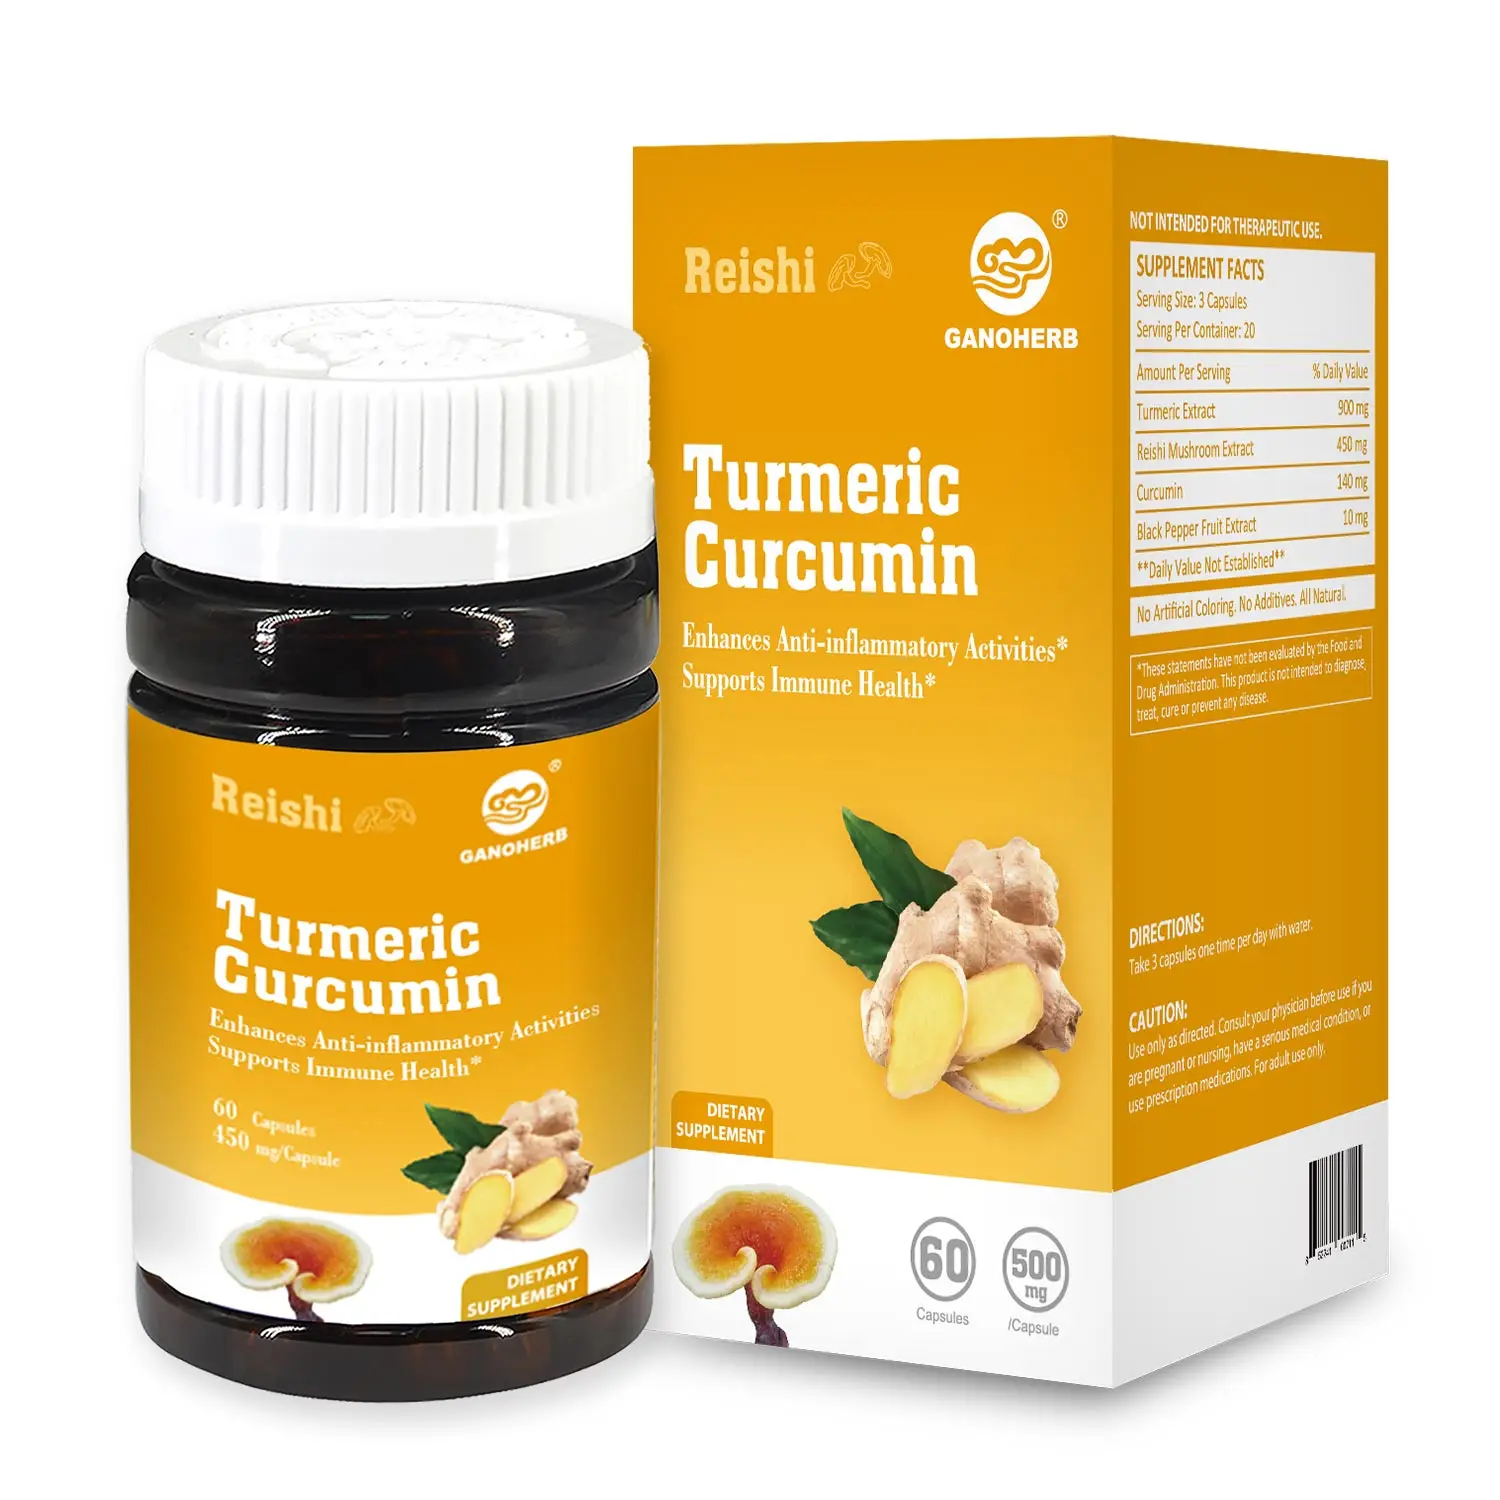 Hot Sale Dietary Supplement Turmeric Curcumin Capsules,Premium Pain Relief & Joint Support